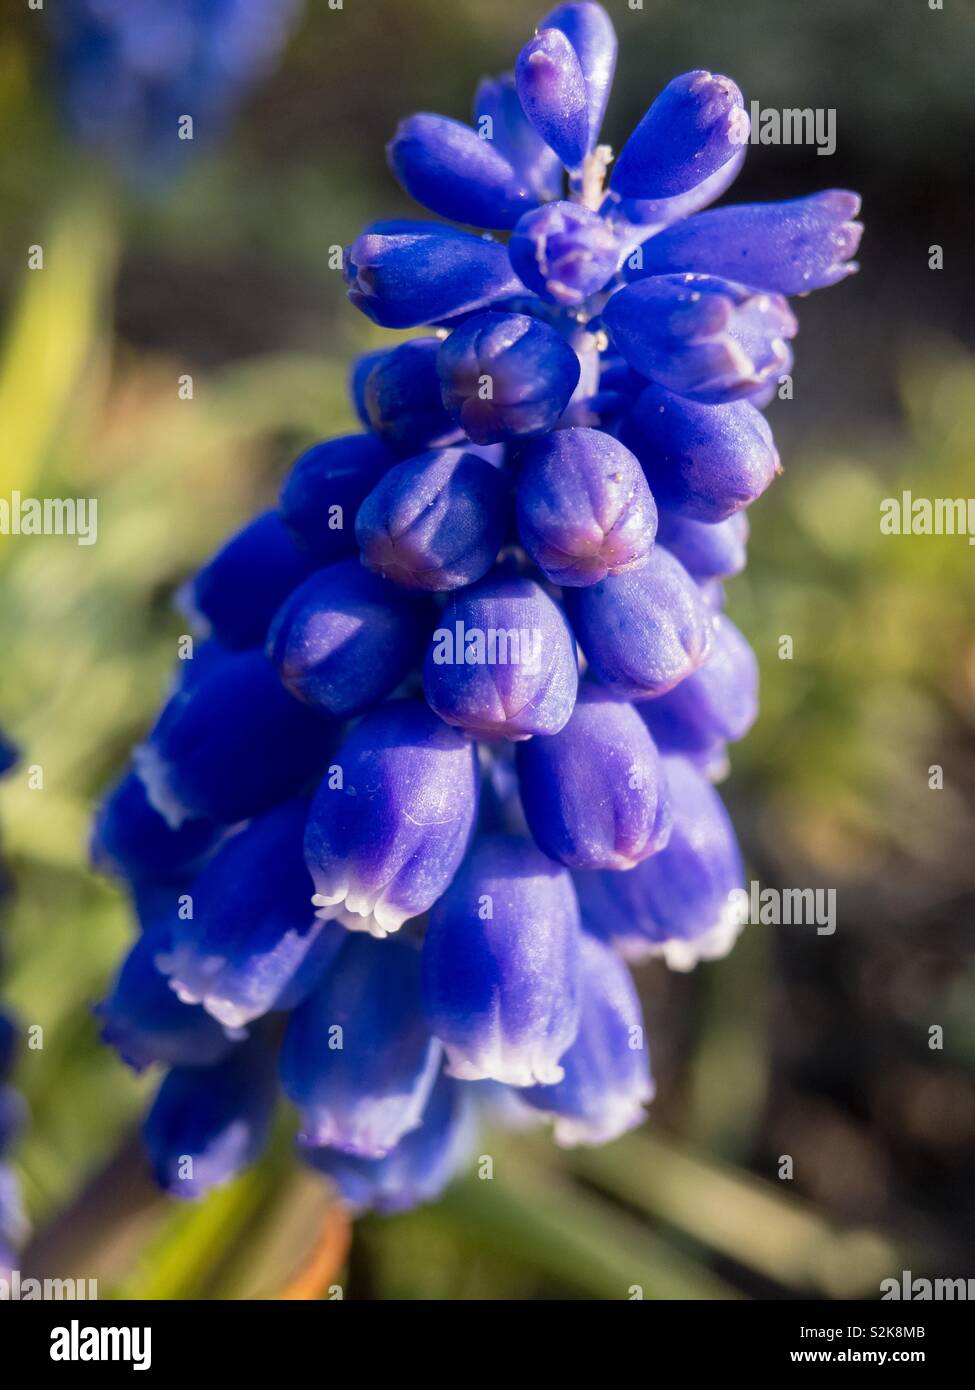 A common grape hyacinth flowering in the garden Stock Photo